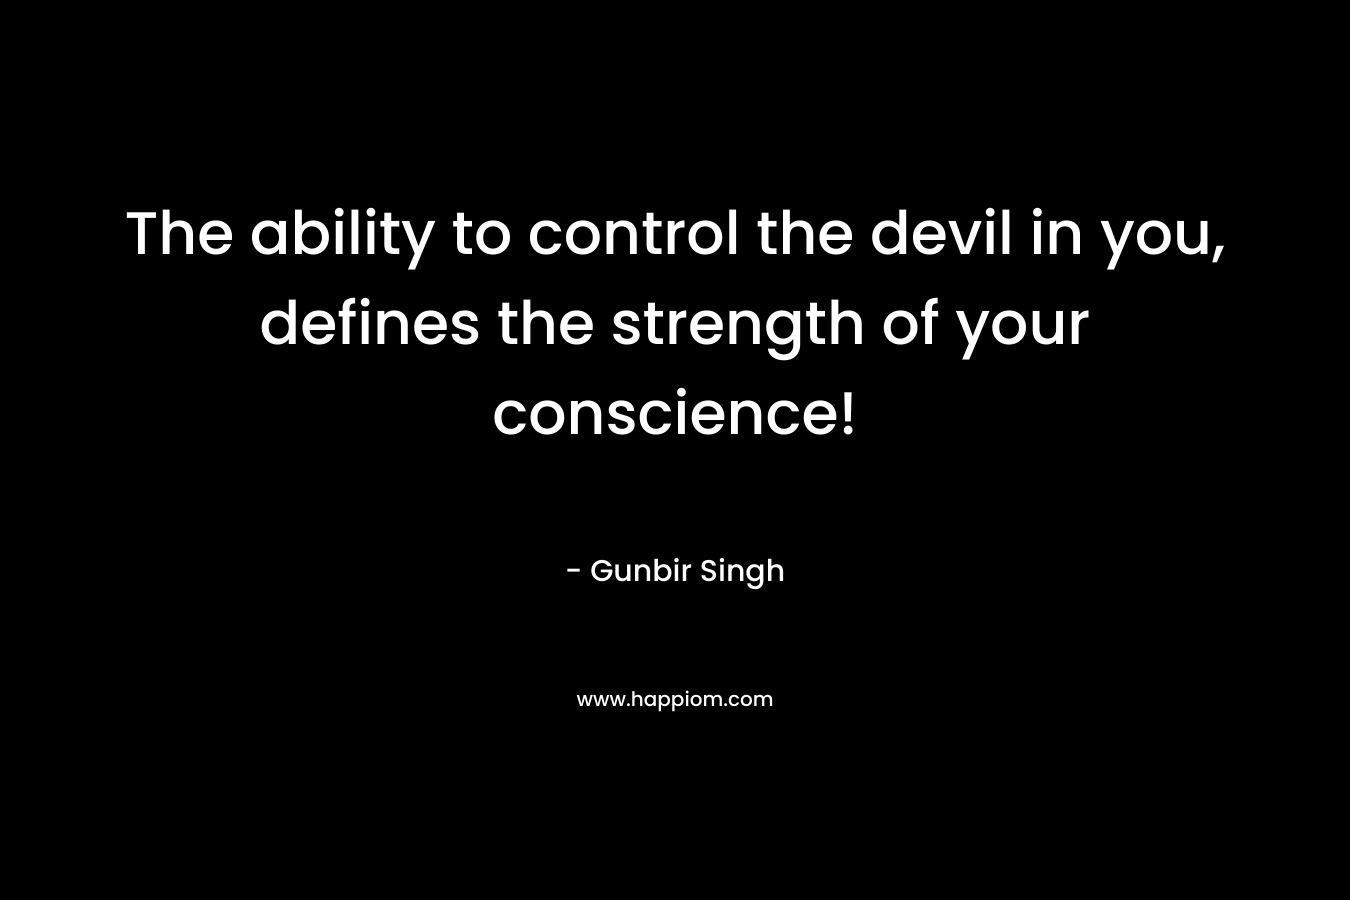 The ability to control the devil in you, defines the strength of your conscience! – Gunbir Singh